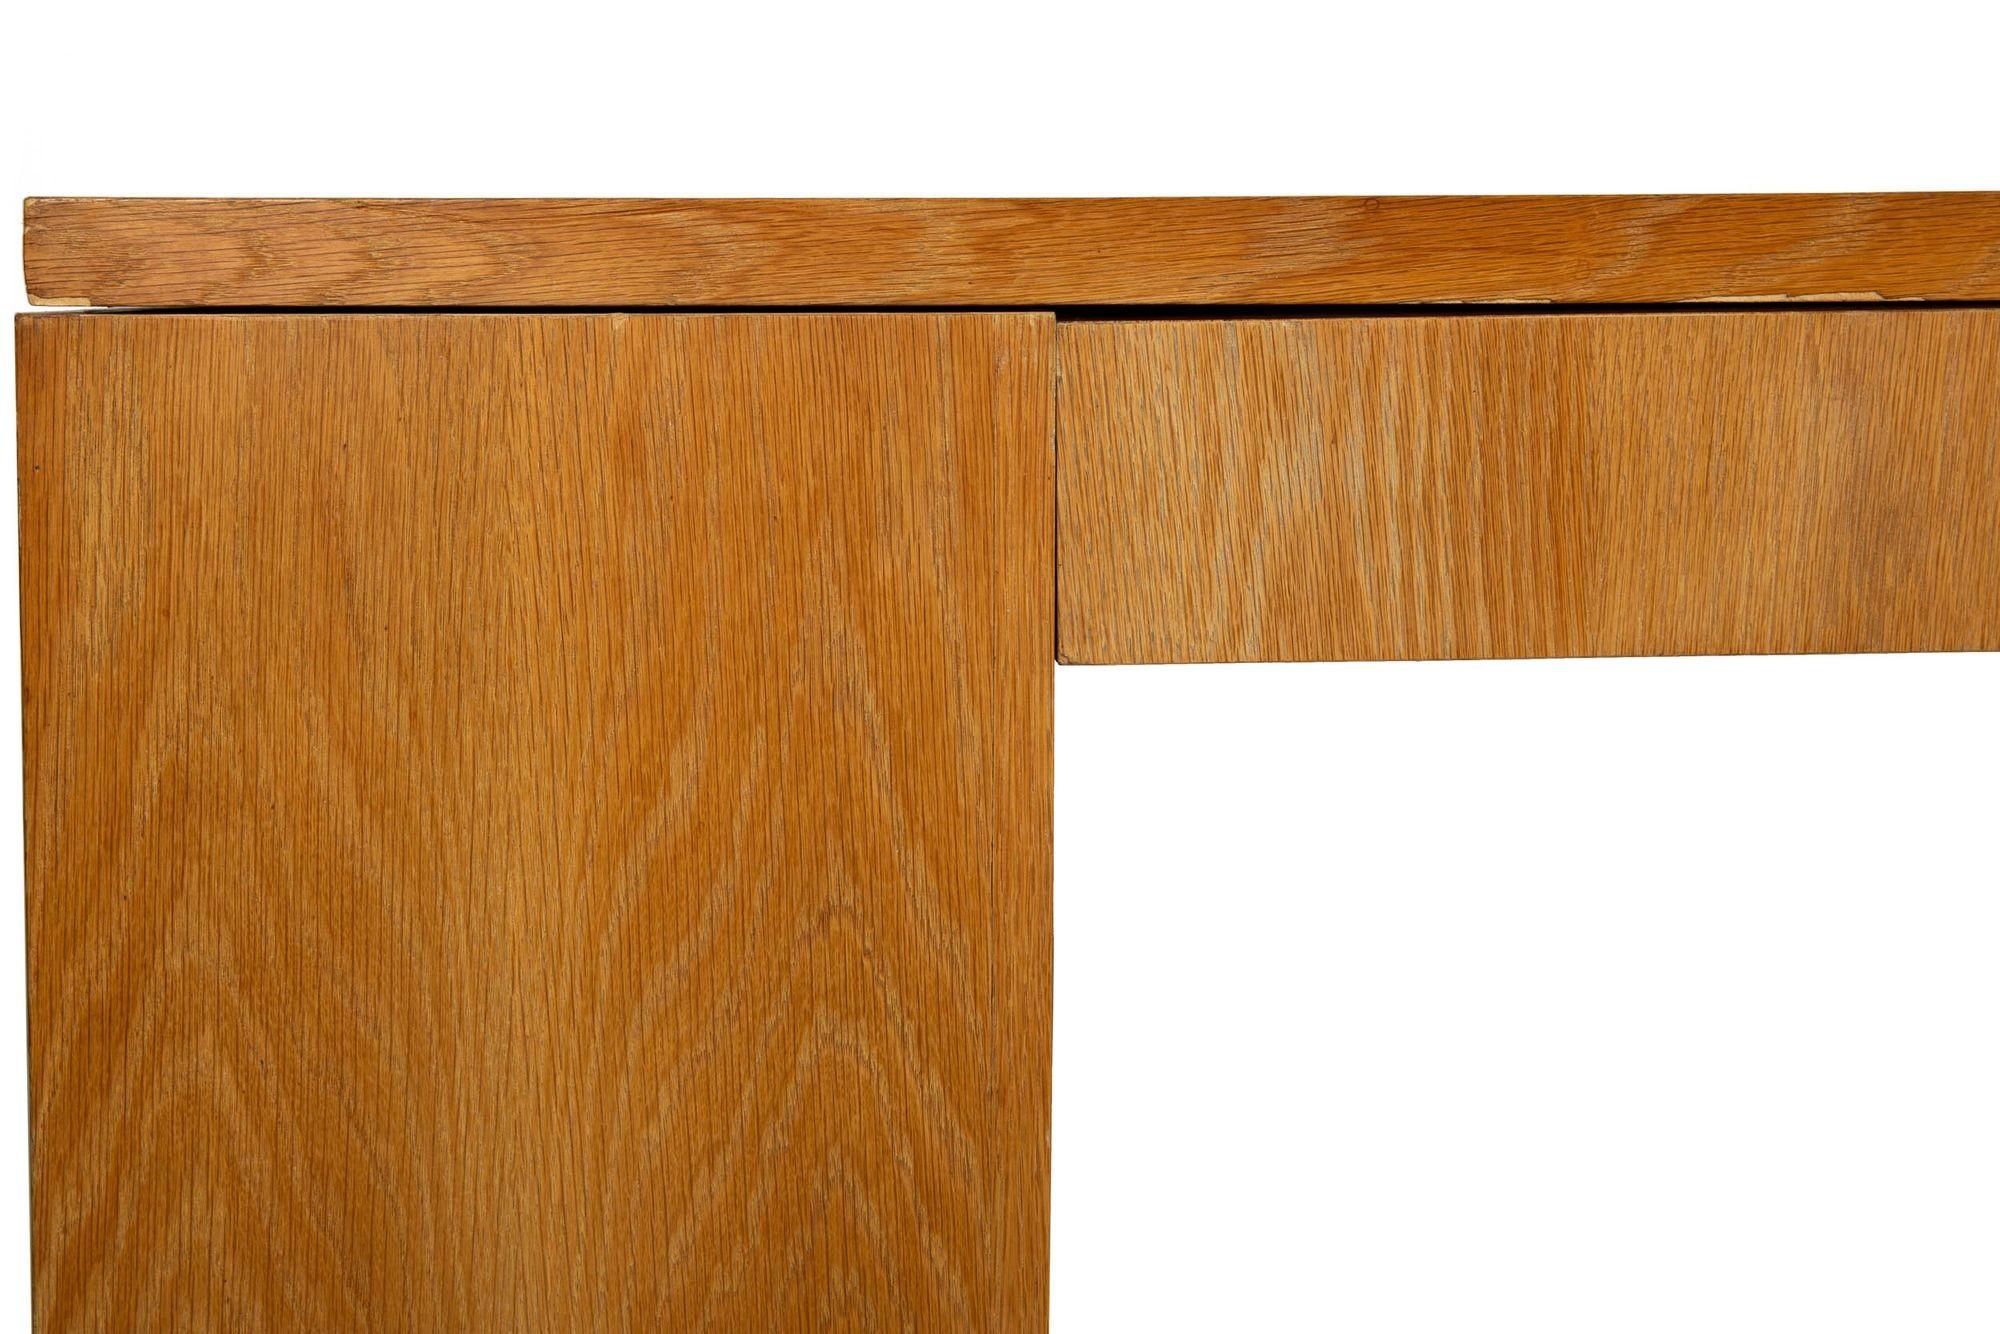 French Modernist Cerused Oak and Lacquered Skin Pedestal Desk ca. 1950s For Sale 14